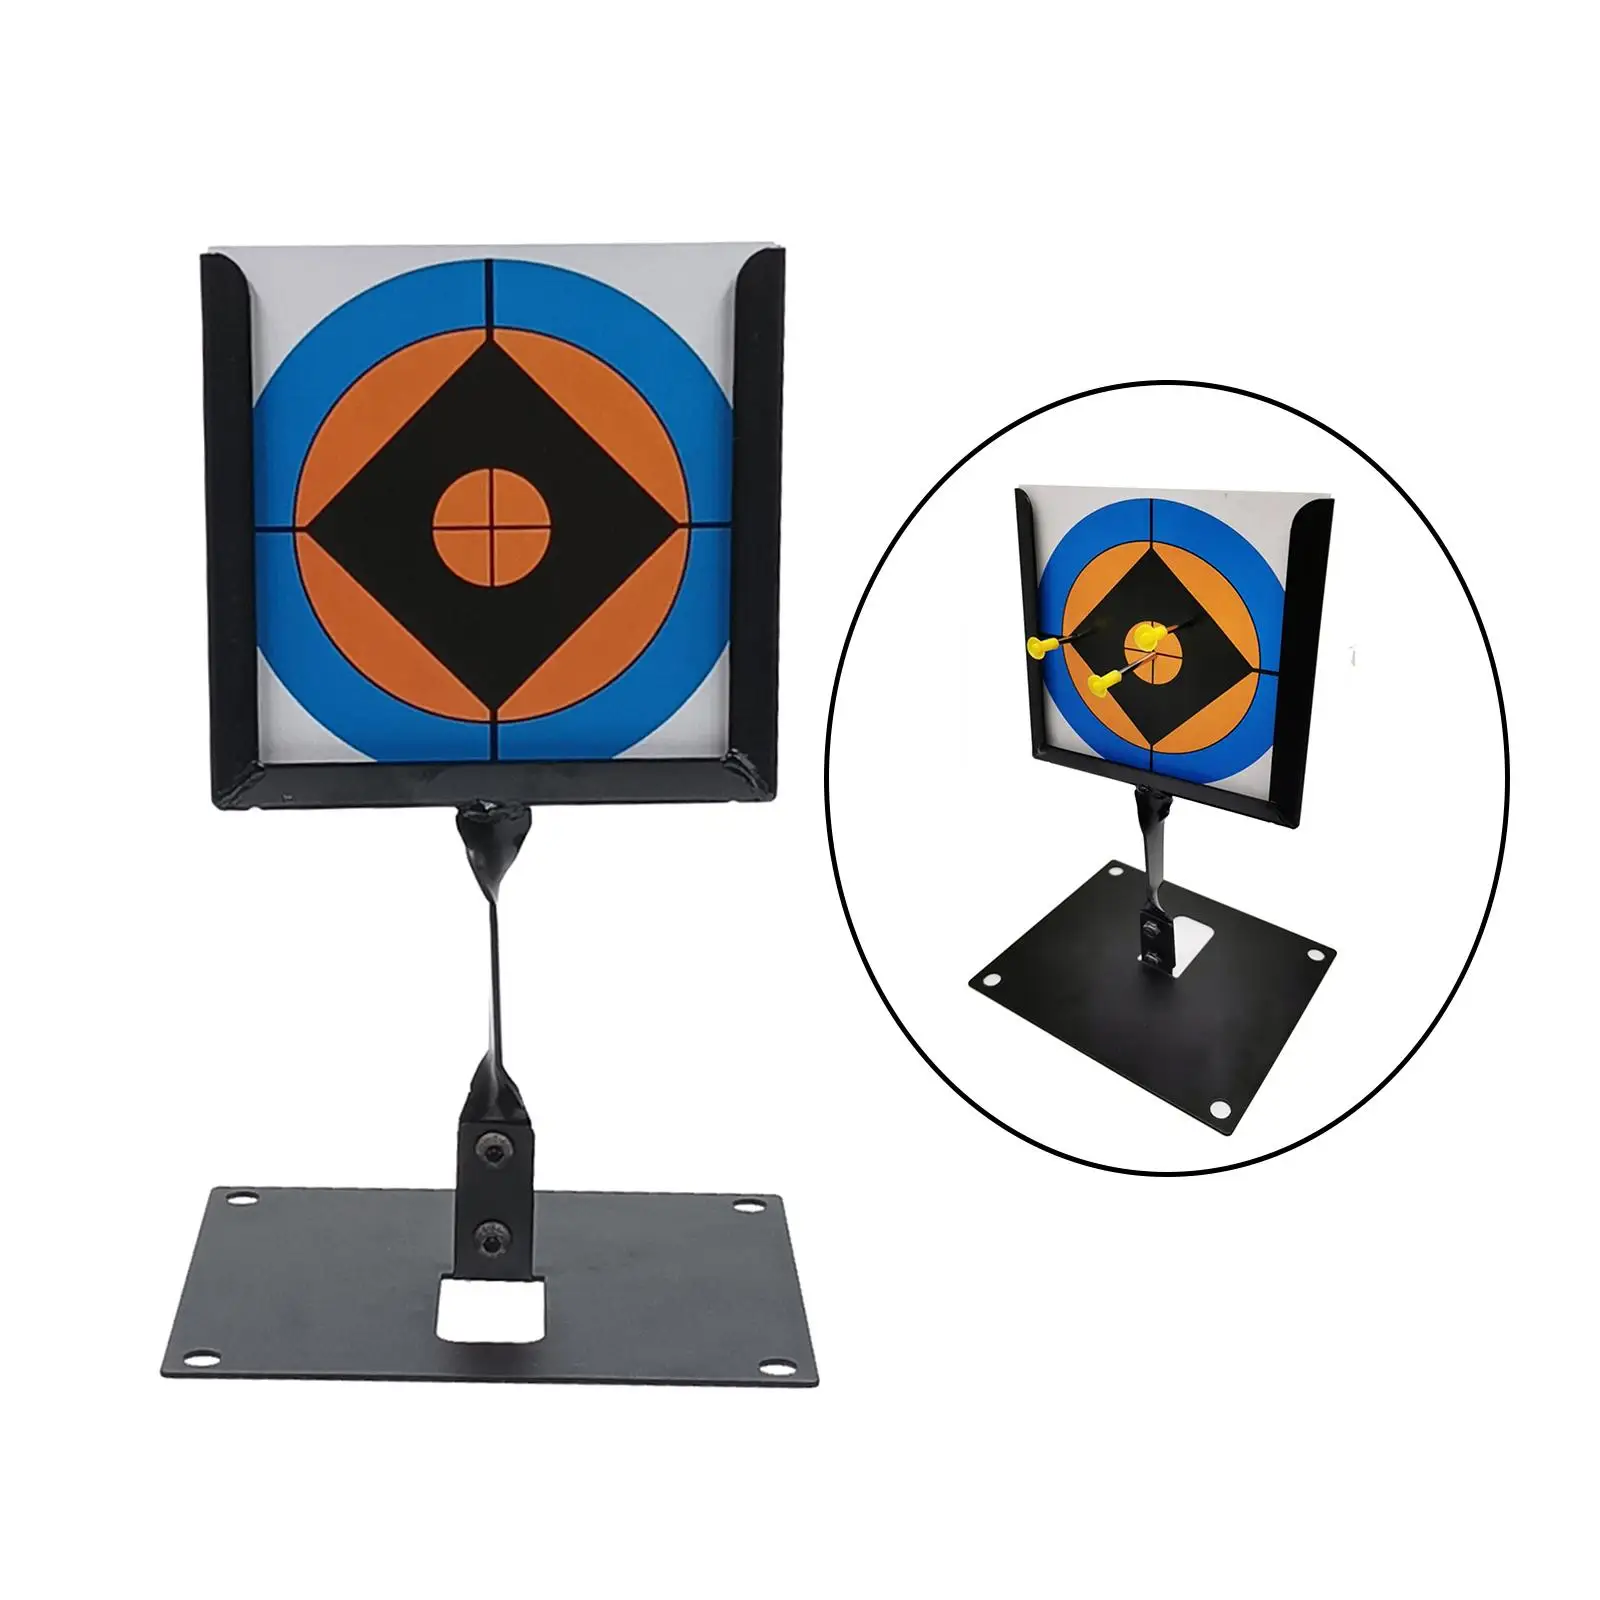 Target Stand Holder Shooting with Paper Target Range Practice Hunting Brackets Support for Patio Porch Yard Archery Lawn